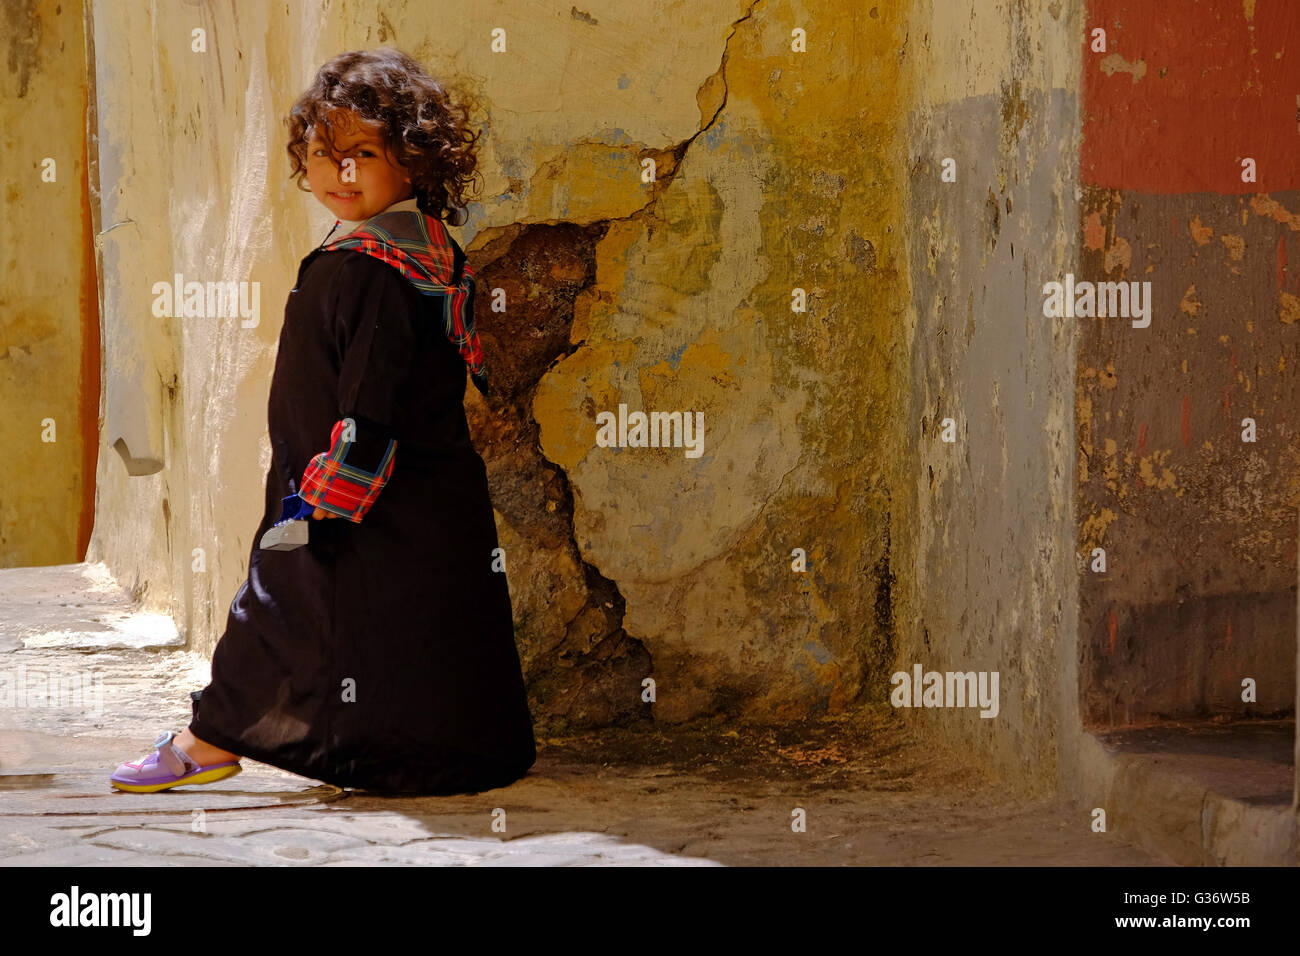 A young girl in traditional clothing, El Jadida Morocco Stock Photo